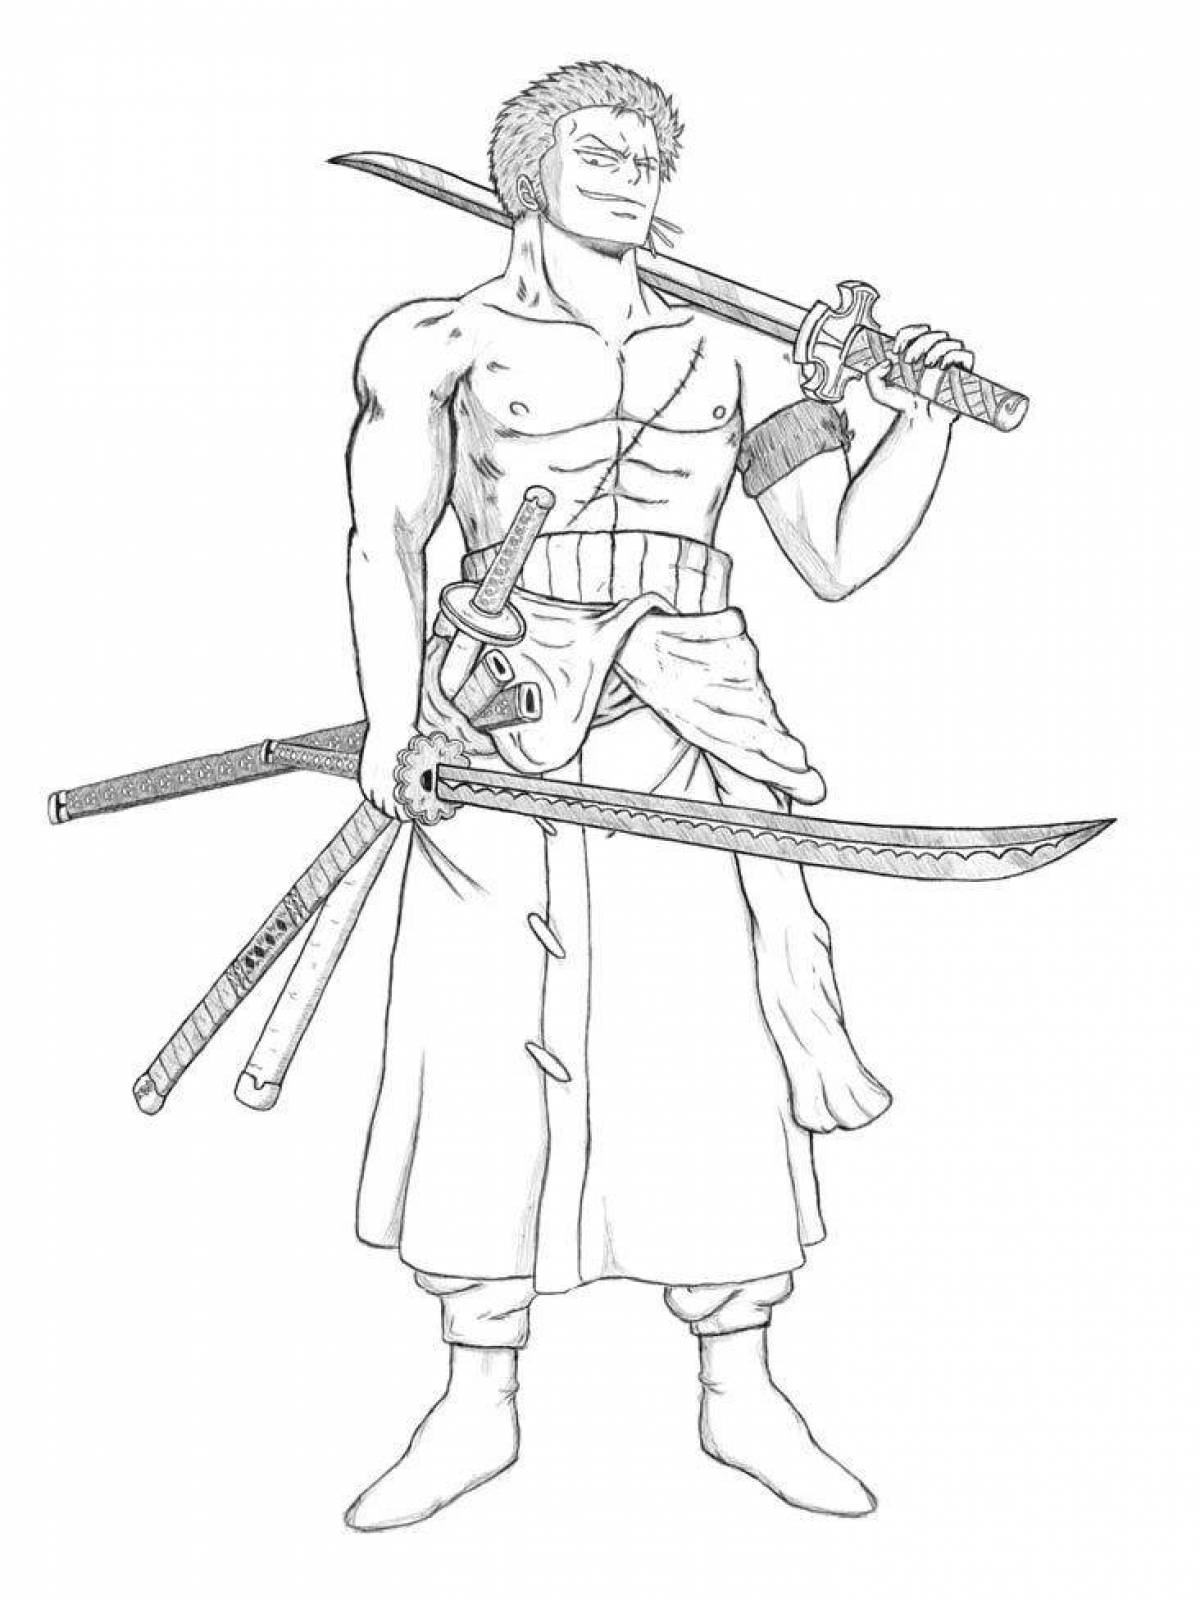 Zoro colorful coloring page